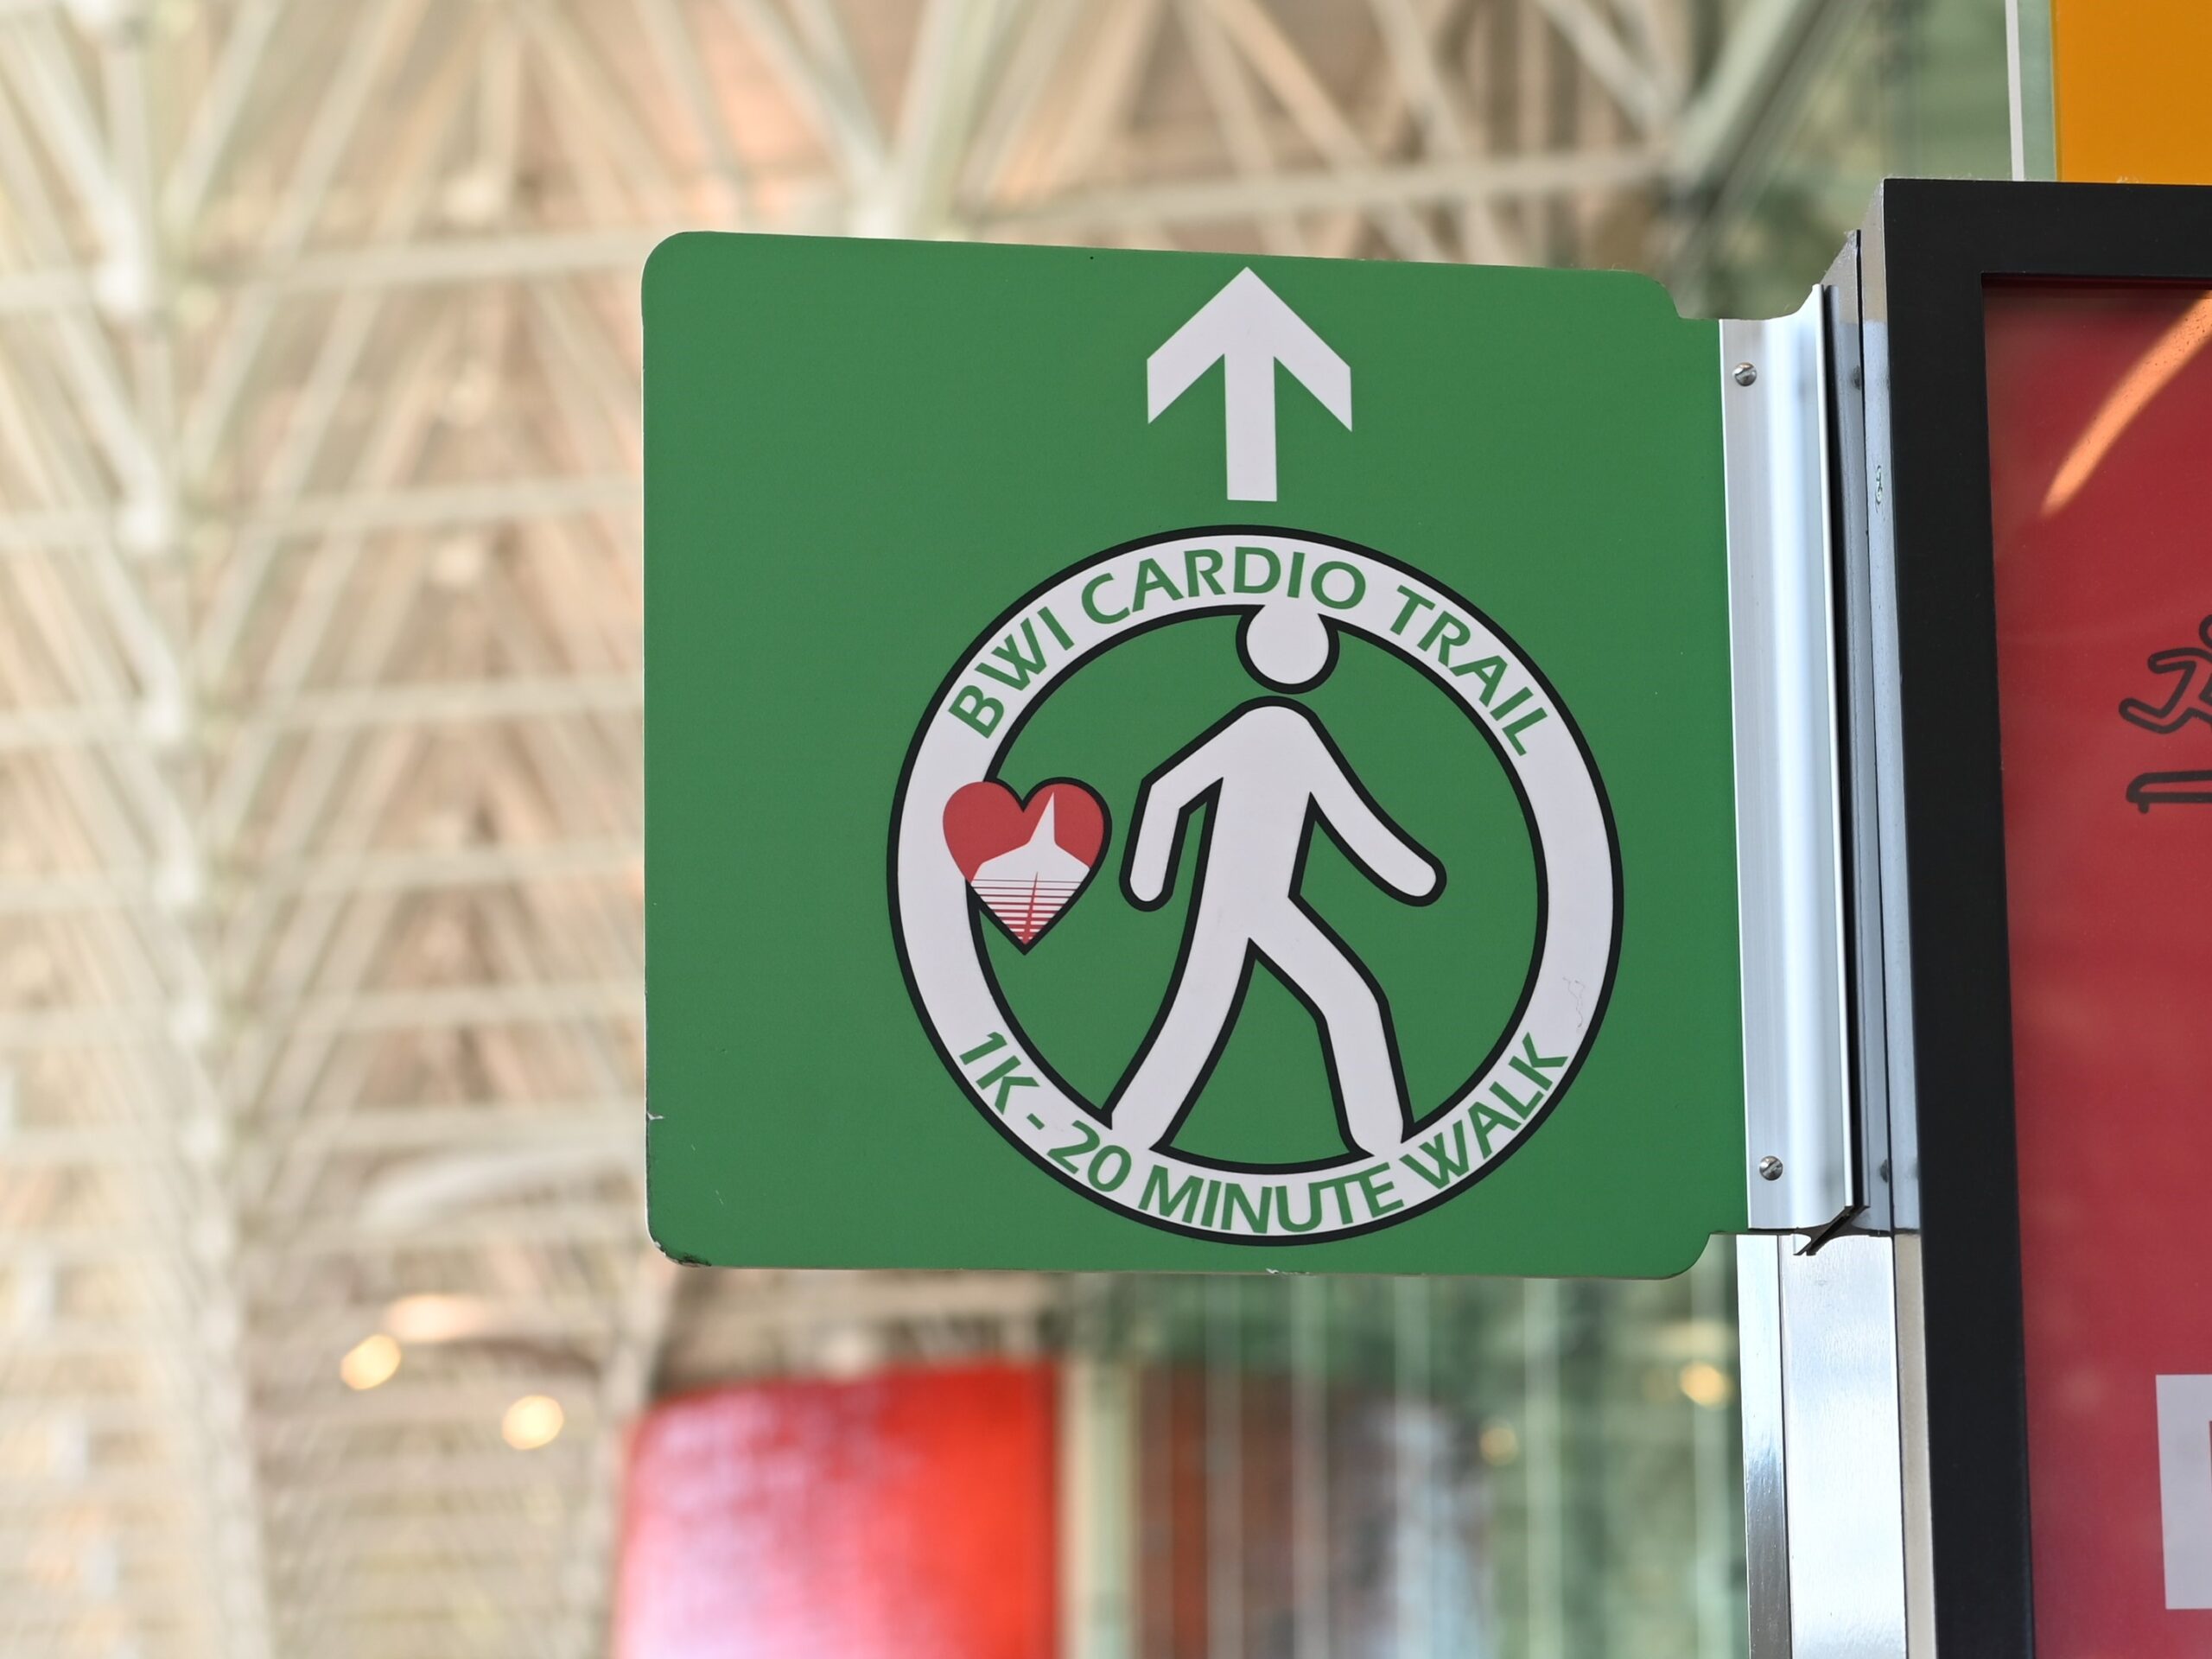 Photo of a Cardio Trail sign displayed at BWI Marshall Airport.